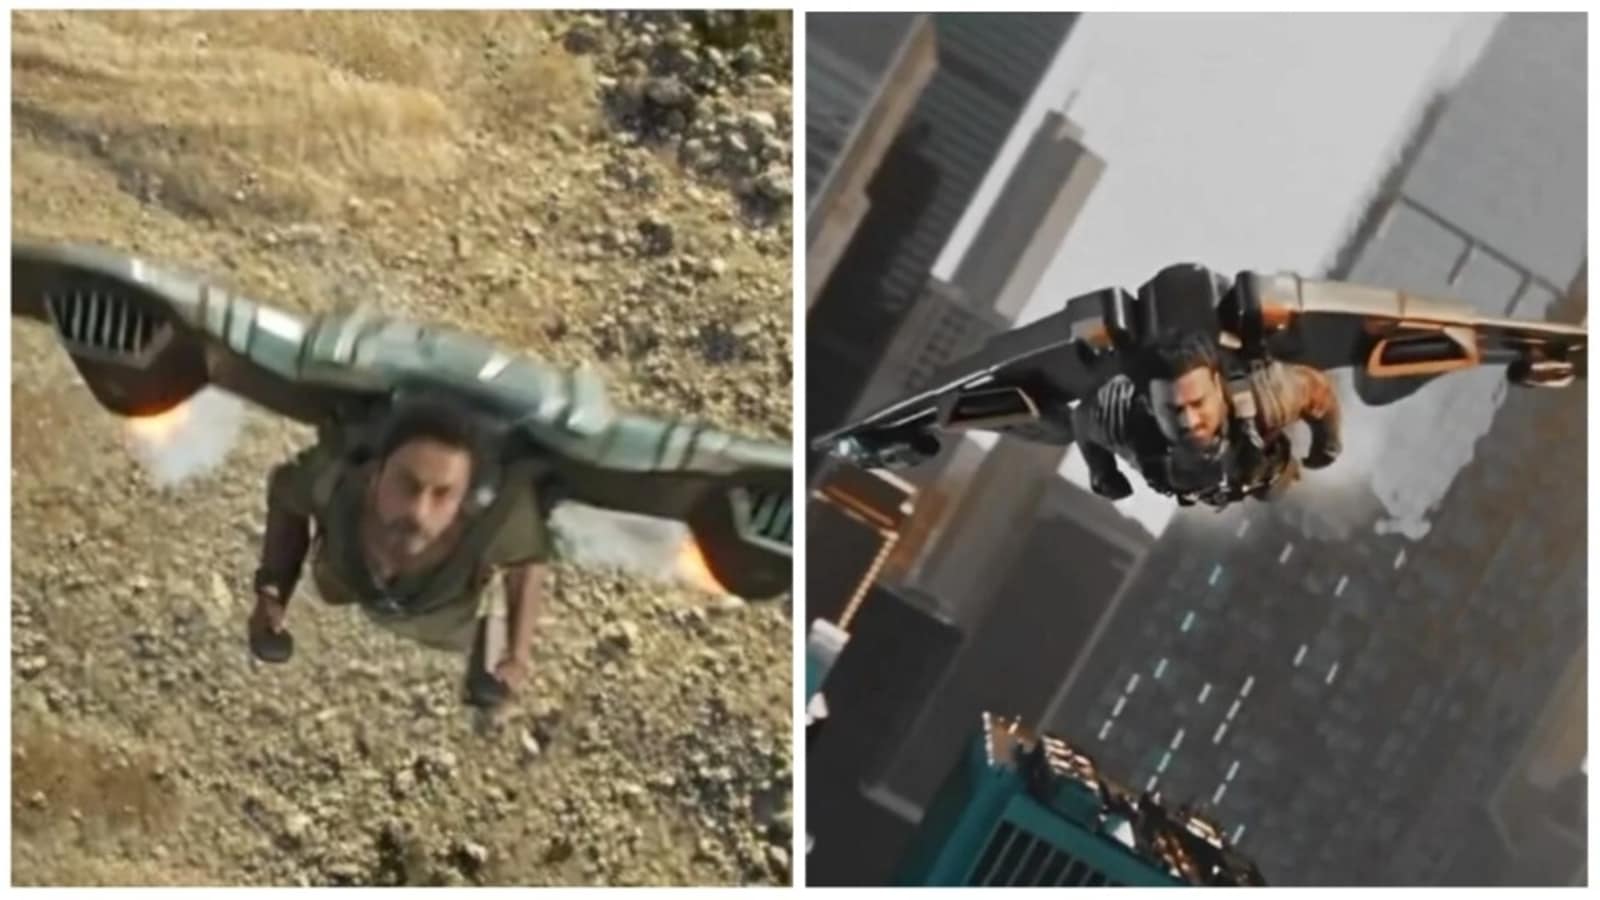 internet-calls-pathaan-s-vfx-embarrassing-compares-it-to-saaho-looks-like-crowd-funded-b-grade-movie-from-hollywood